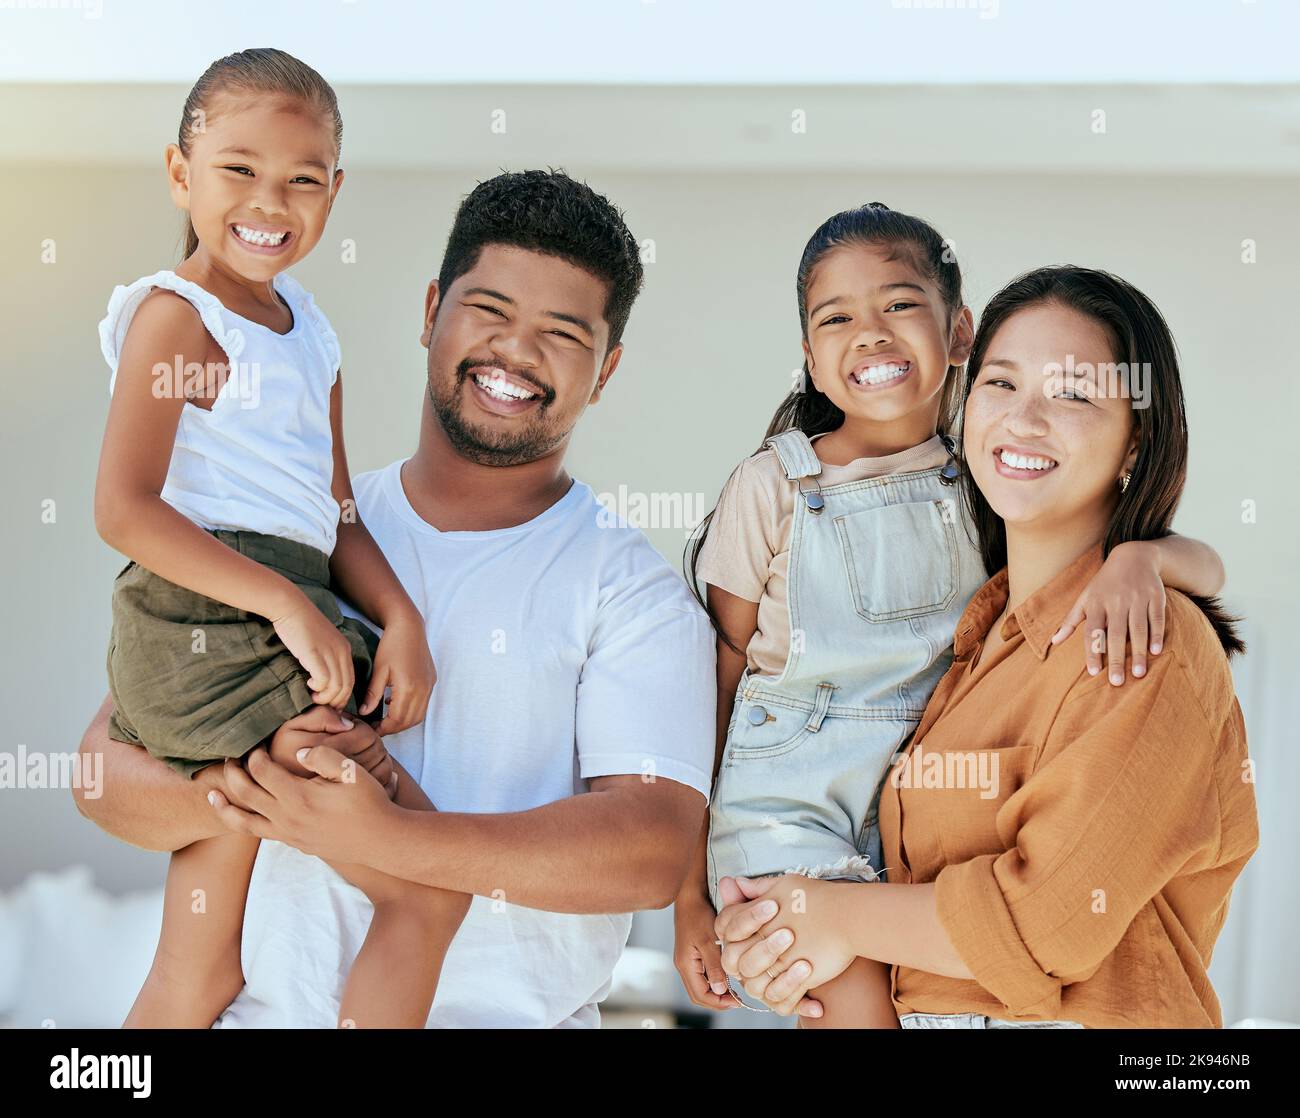 Happy family, love and portrait of parents, children or group of people bonding, relax and enjoy fun quality time together. Happiness, smile and Stock Photo